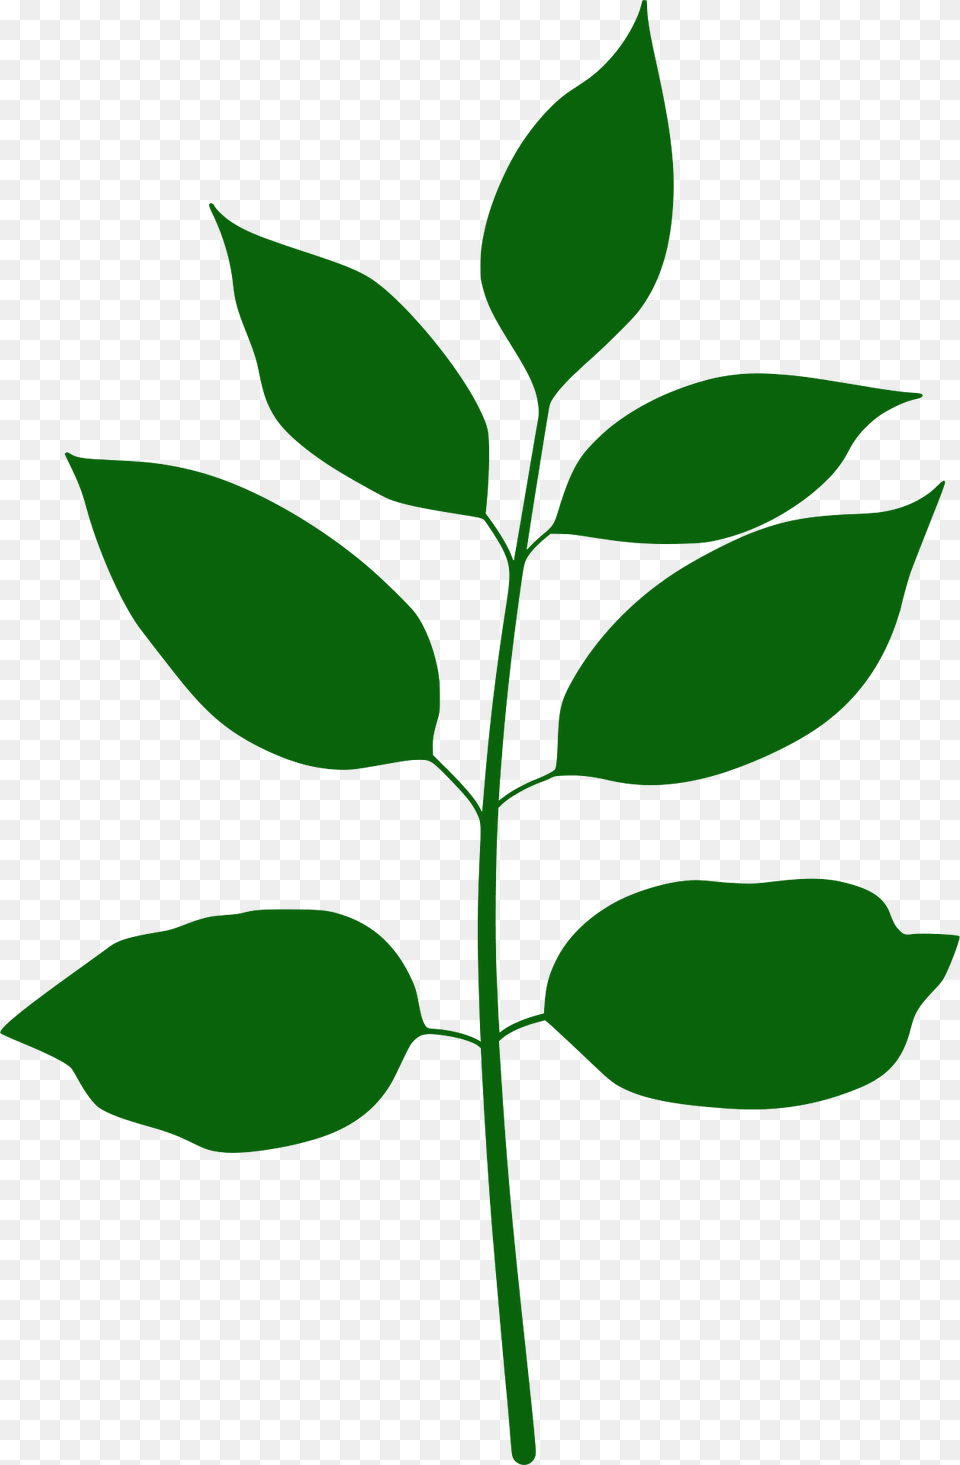 Texas Ash Leaf Silhouette, Green, Herbal, Herbs, Plant Png Image